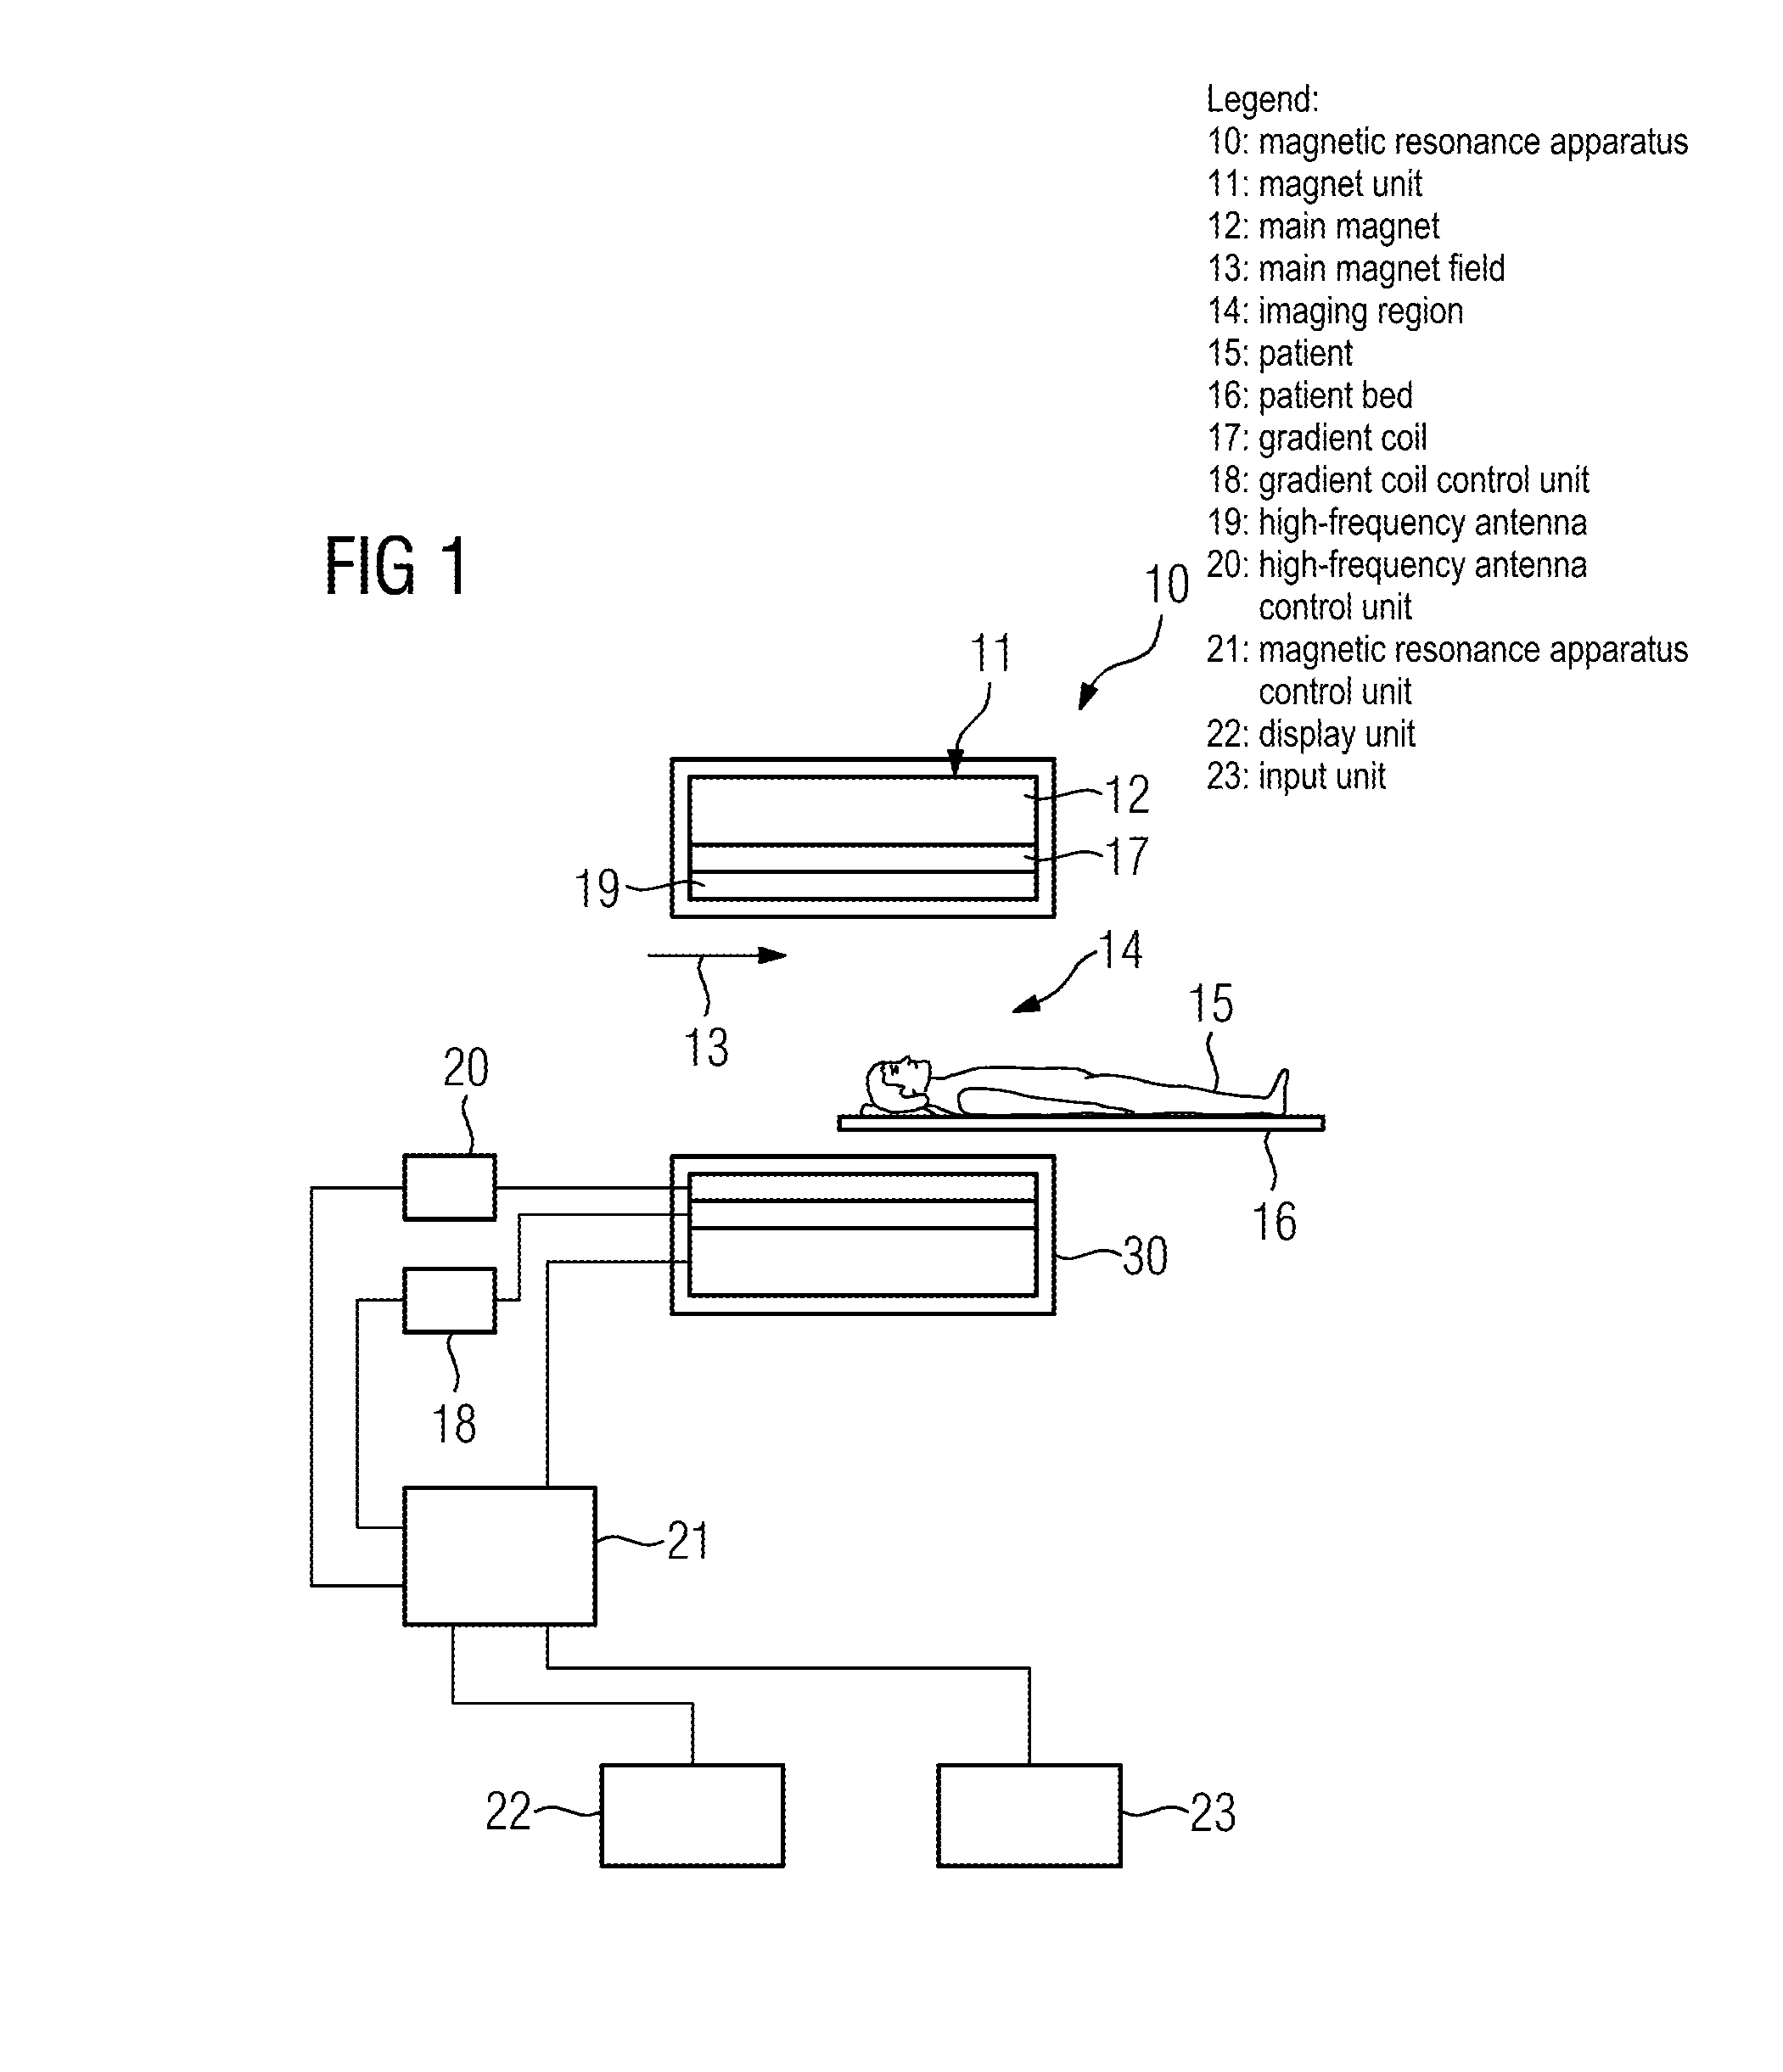 Magnetic resonance apparatus with touchscreen in flexible foil housing